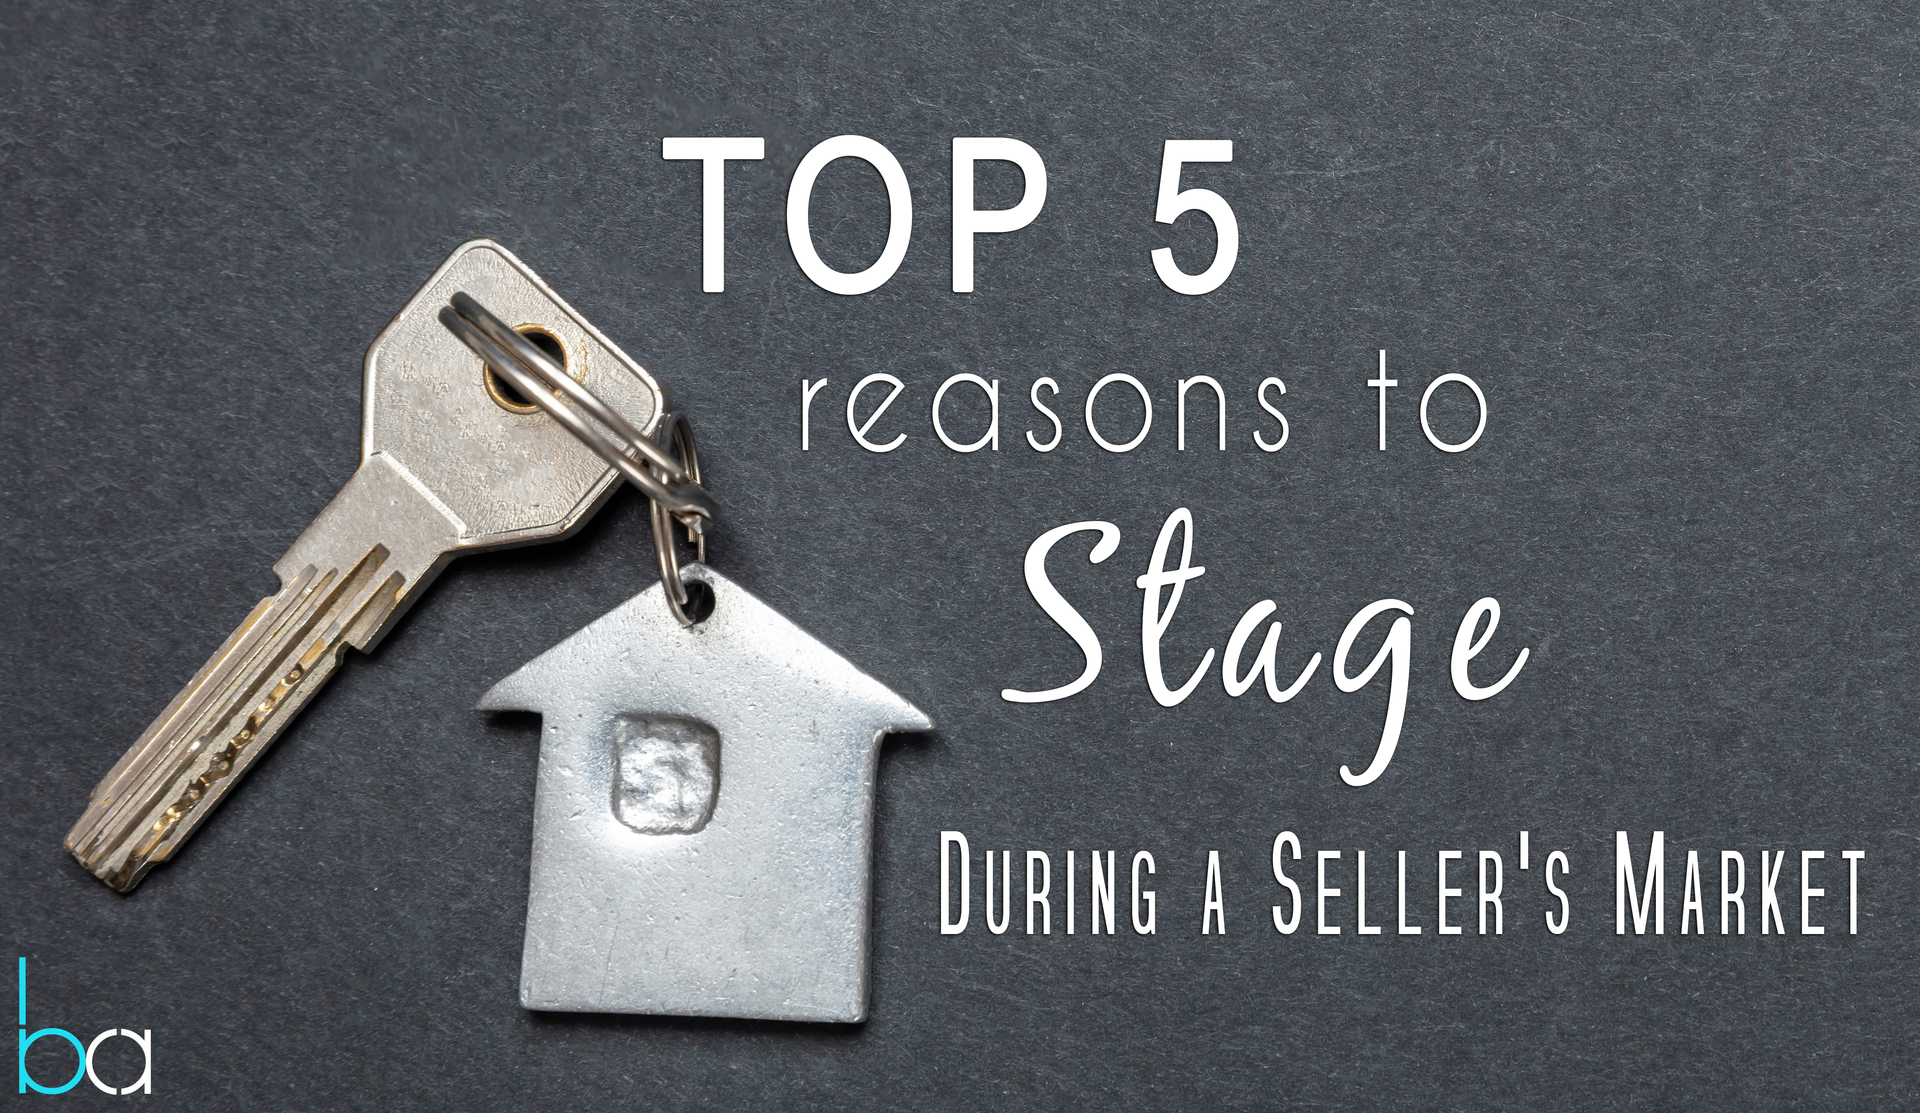 TOP 5 REASONS TO STAGE DURING A SELLER’S MARKET